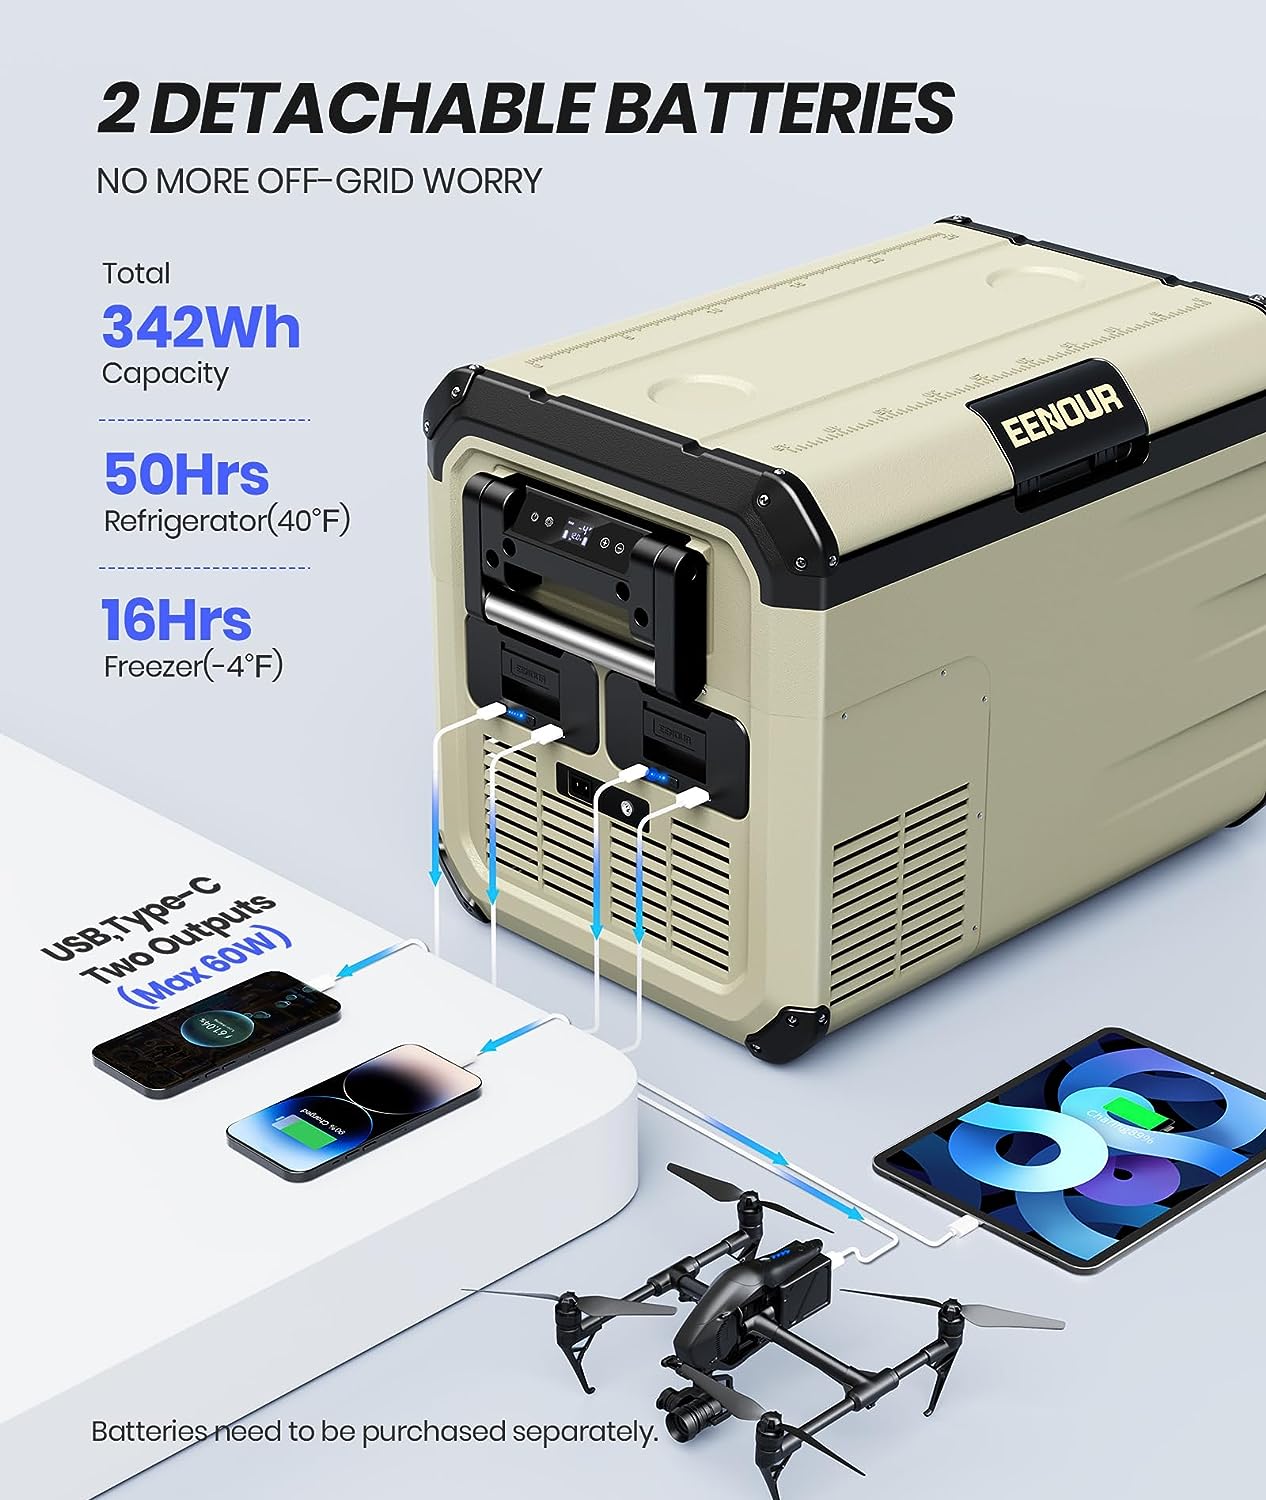 Eenour Portable Cooler With Solar Power With Battery